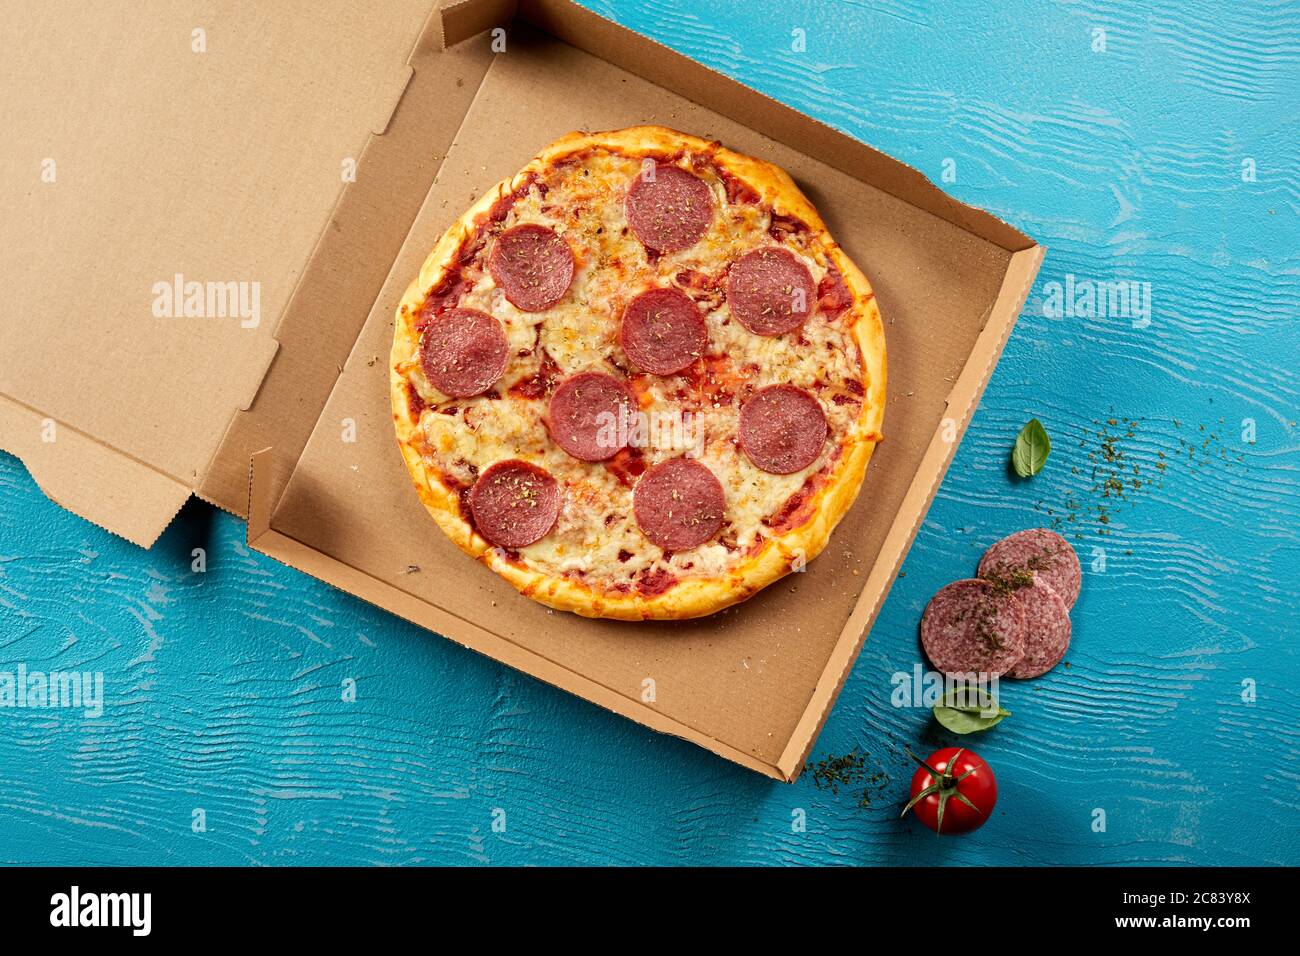 Oven-fired traditional Italian pepperoni or salami pizza in a cardboard box ready for takeaway with fresh ingredients alongside on blue wood in an ove Stock Photo